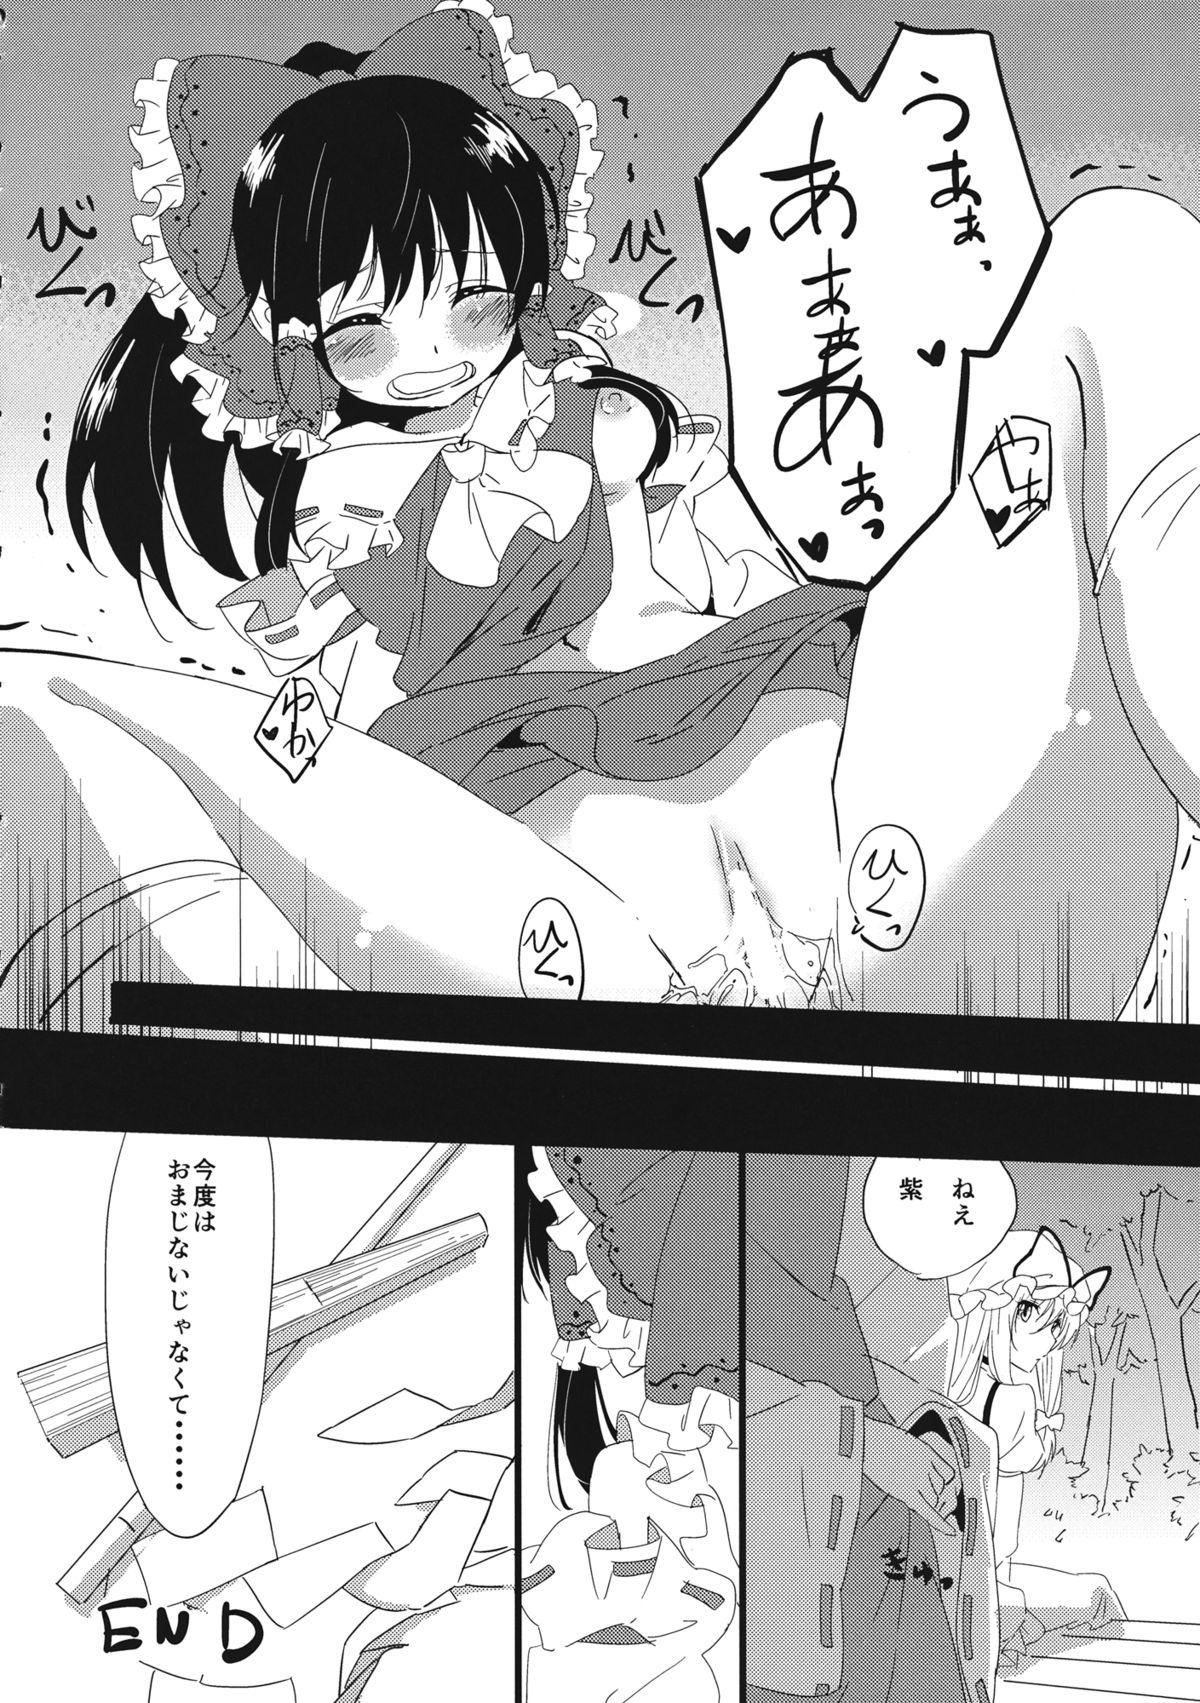 Dick Sucking Porn Touhou Muchi Shichu Goudou - Toho joint magazine sex in the ignorant situations - Touhou project Real Sex - Page 8